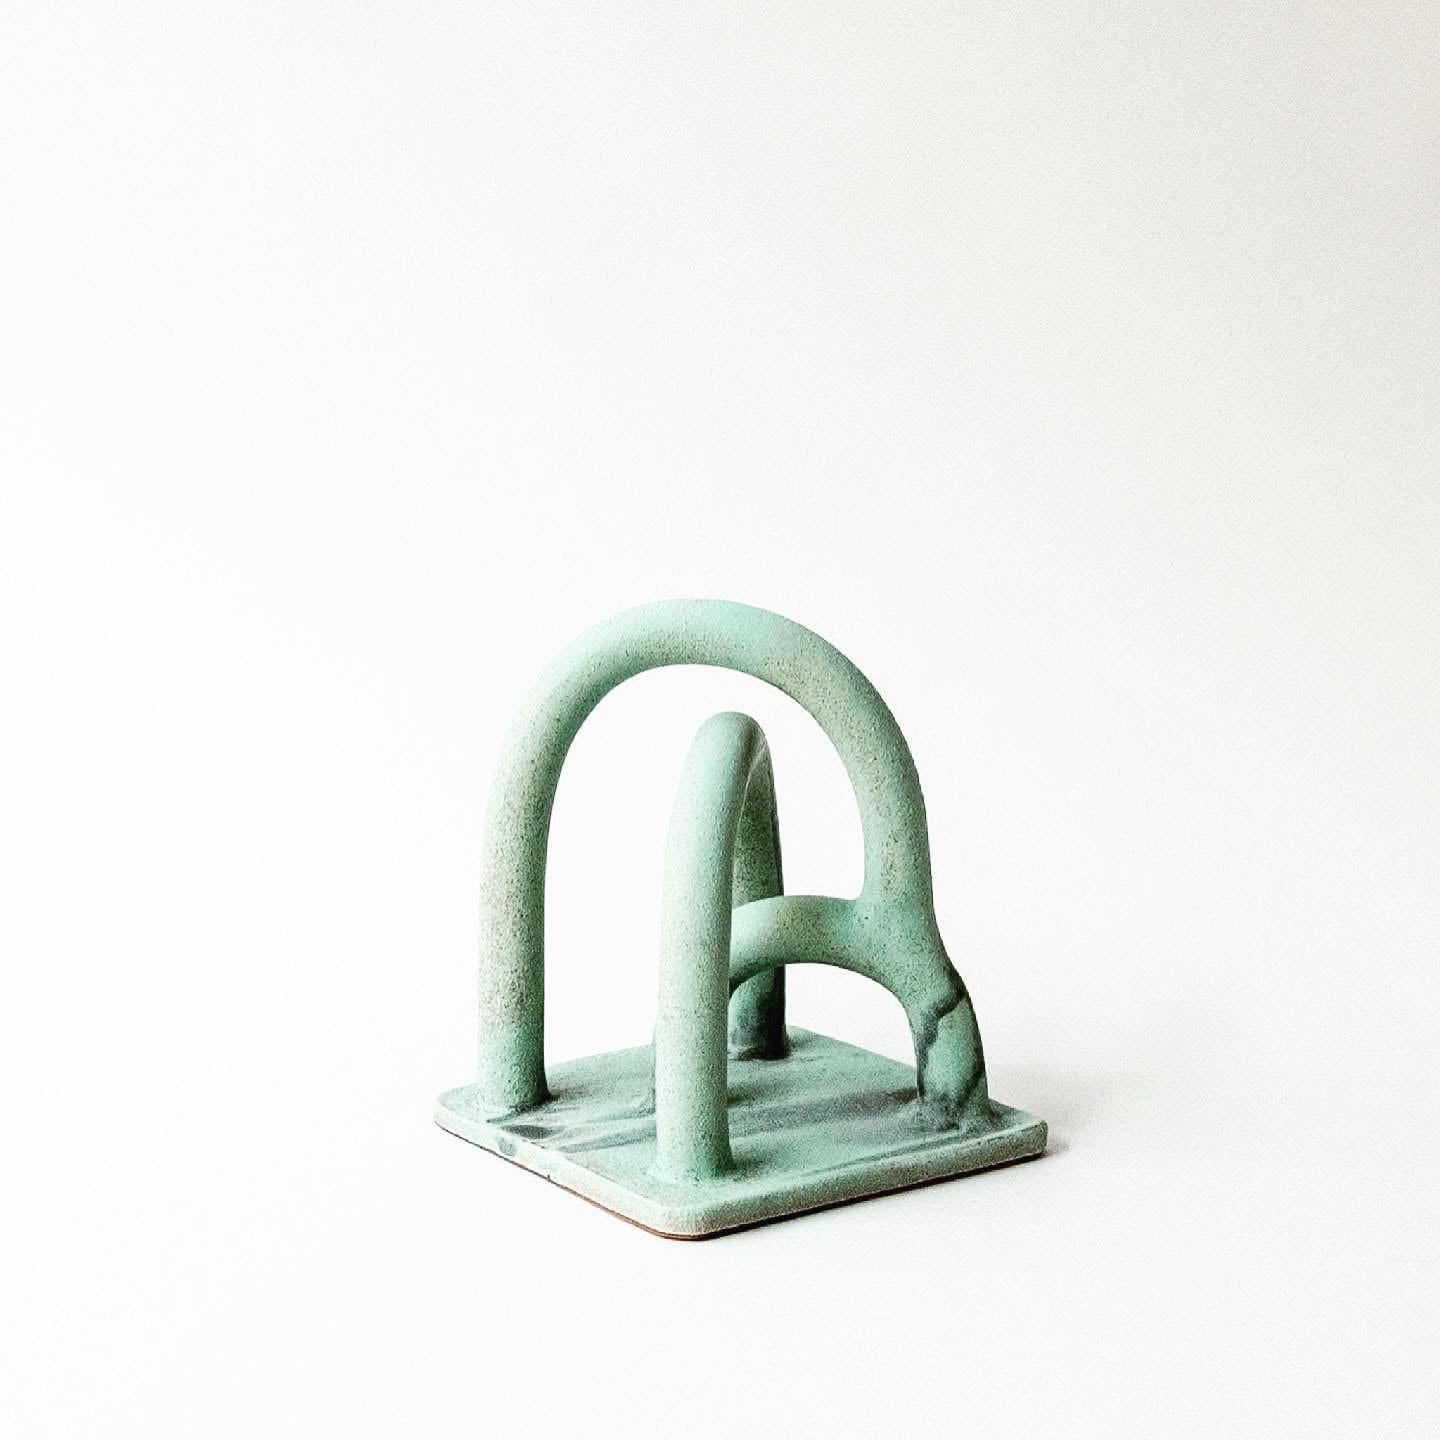 Doodle sculpture IV by Sophie Rogers
Dimensions: D 14 x W 14 x H 17 cm
Materials: Ceramic, glaze
Other glaze colors available.

Created based on childhood sketching on paper for hours. Arches shapes the sculpture and are loved by the light and